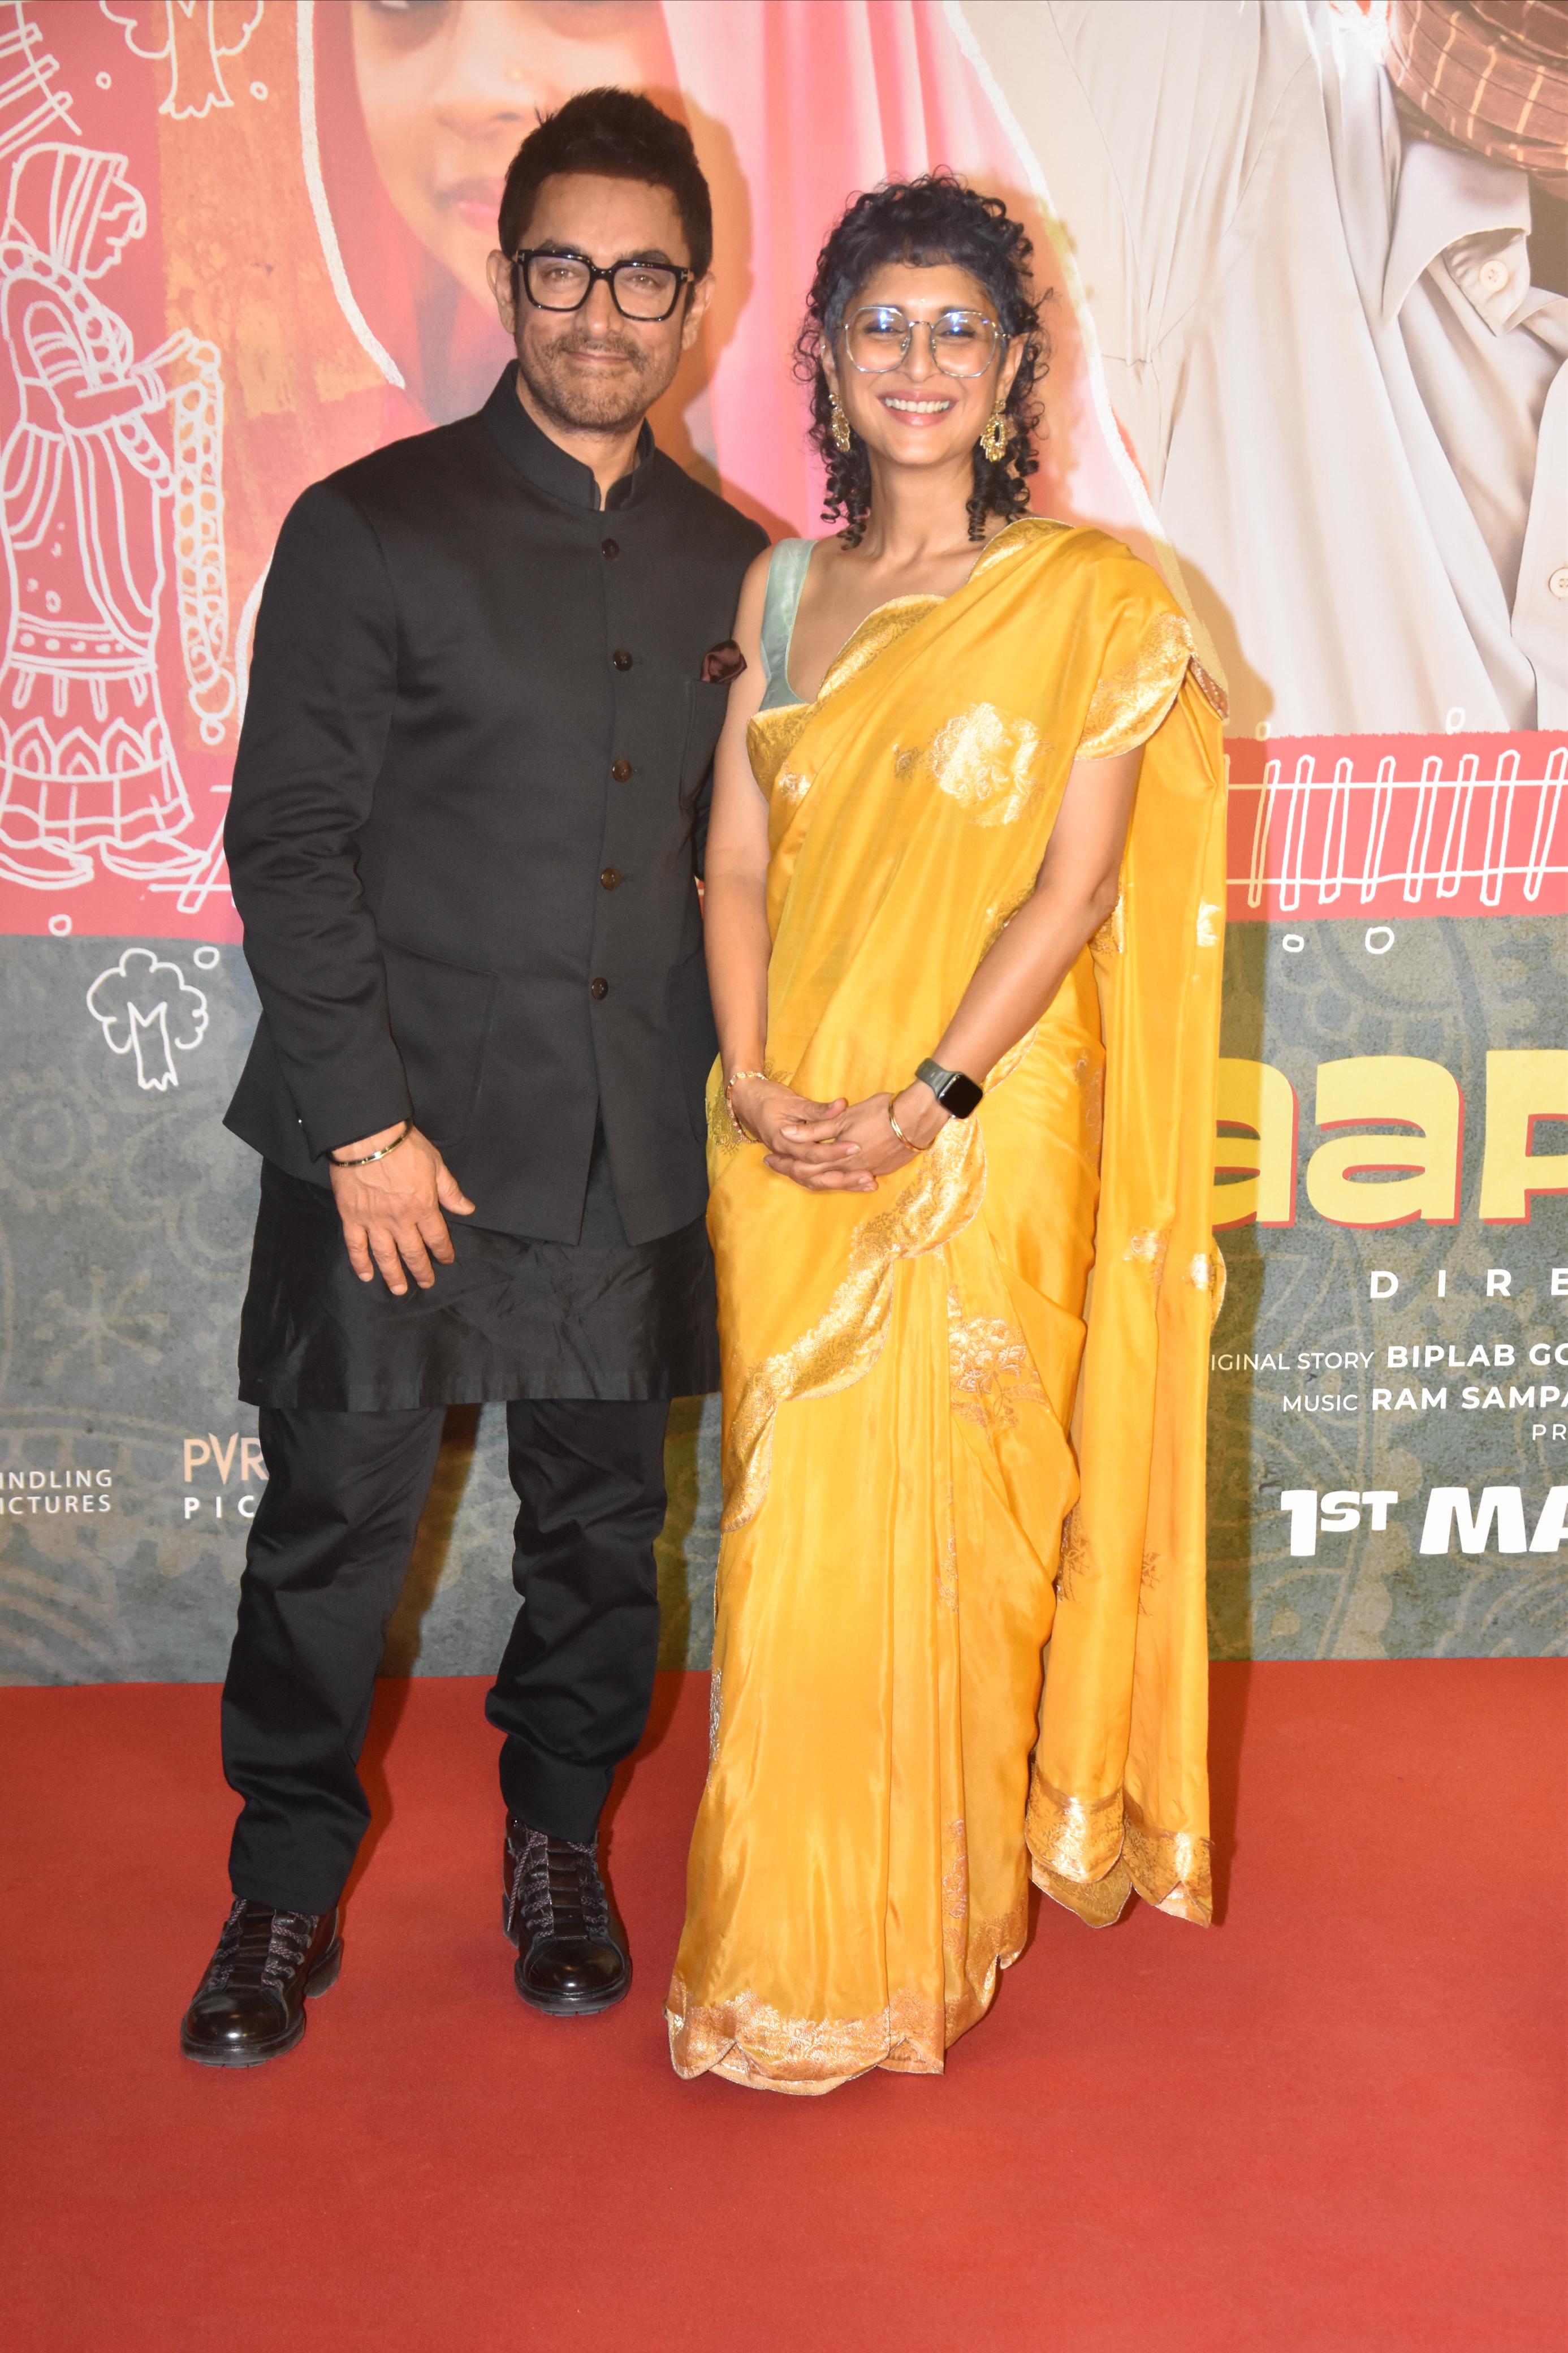 Aamir Khan came to attend the special screening of Kiran Rao's upcoming film 'Laapota Ladies'. The two also posed together on the red carpet of the event